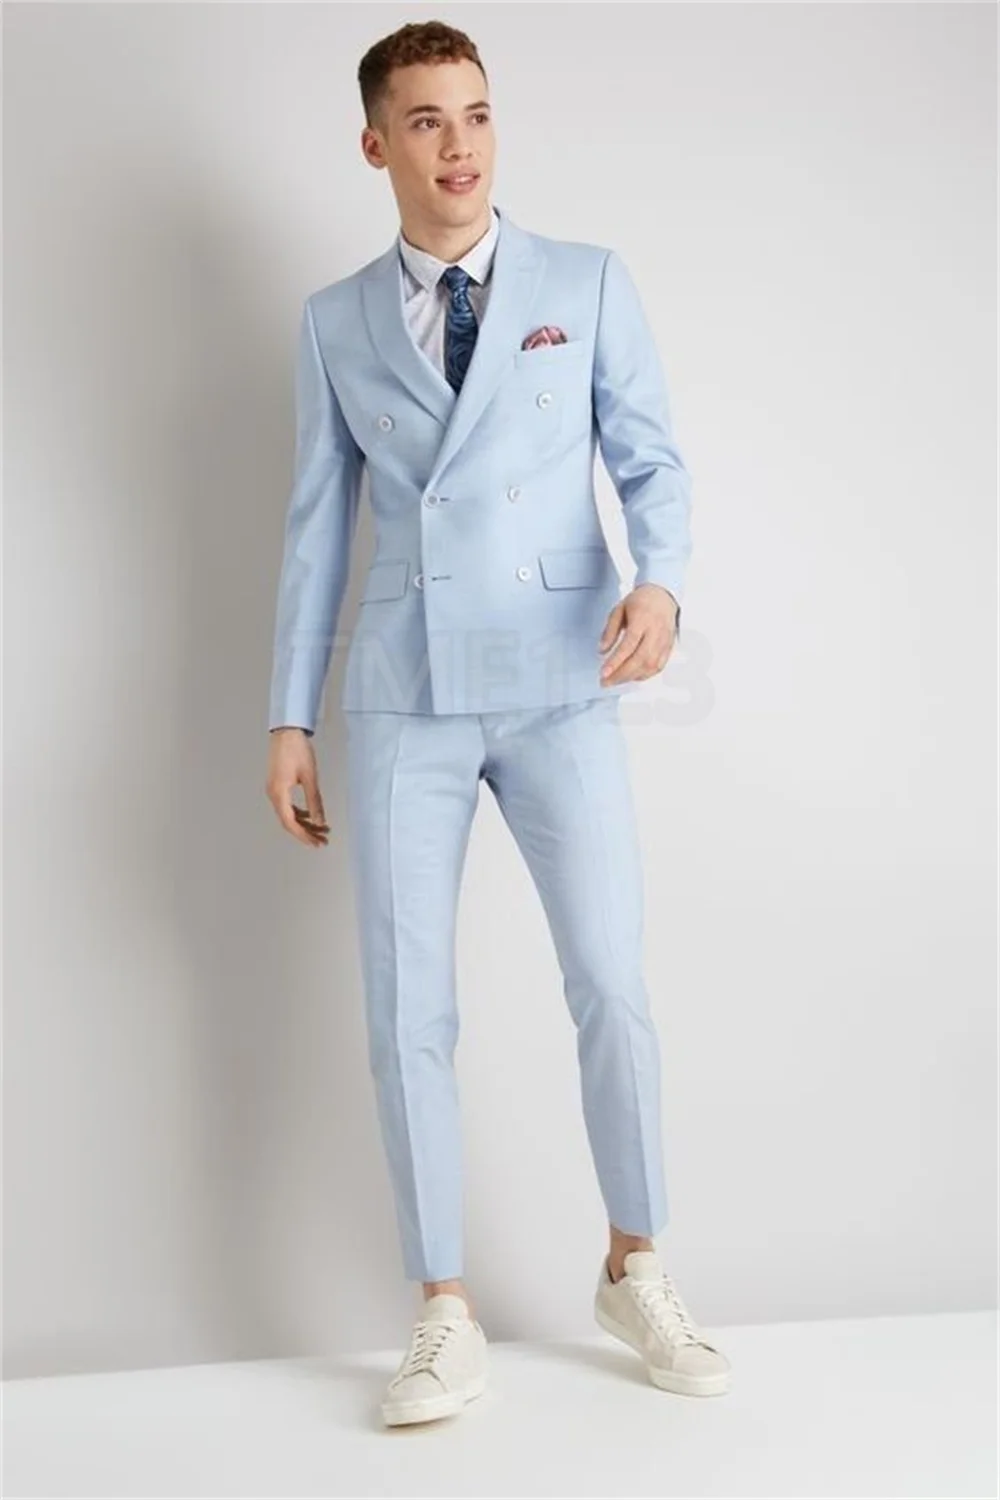 Slim Fit Light Sky Blue Prom Light Blue Suit Men With Notched Lapel For Men  Perfect For Beach Weddings And Formal Events From Mark776, $78.8 |  DHgate.Com